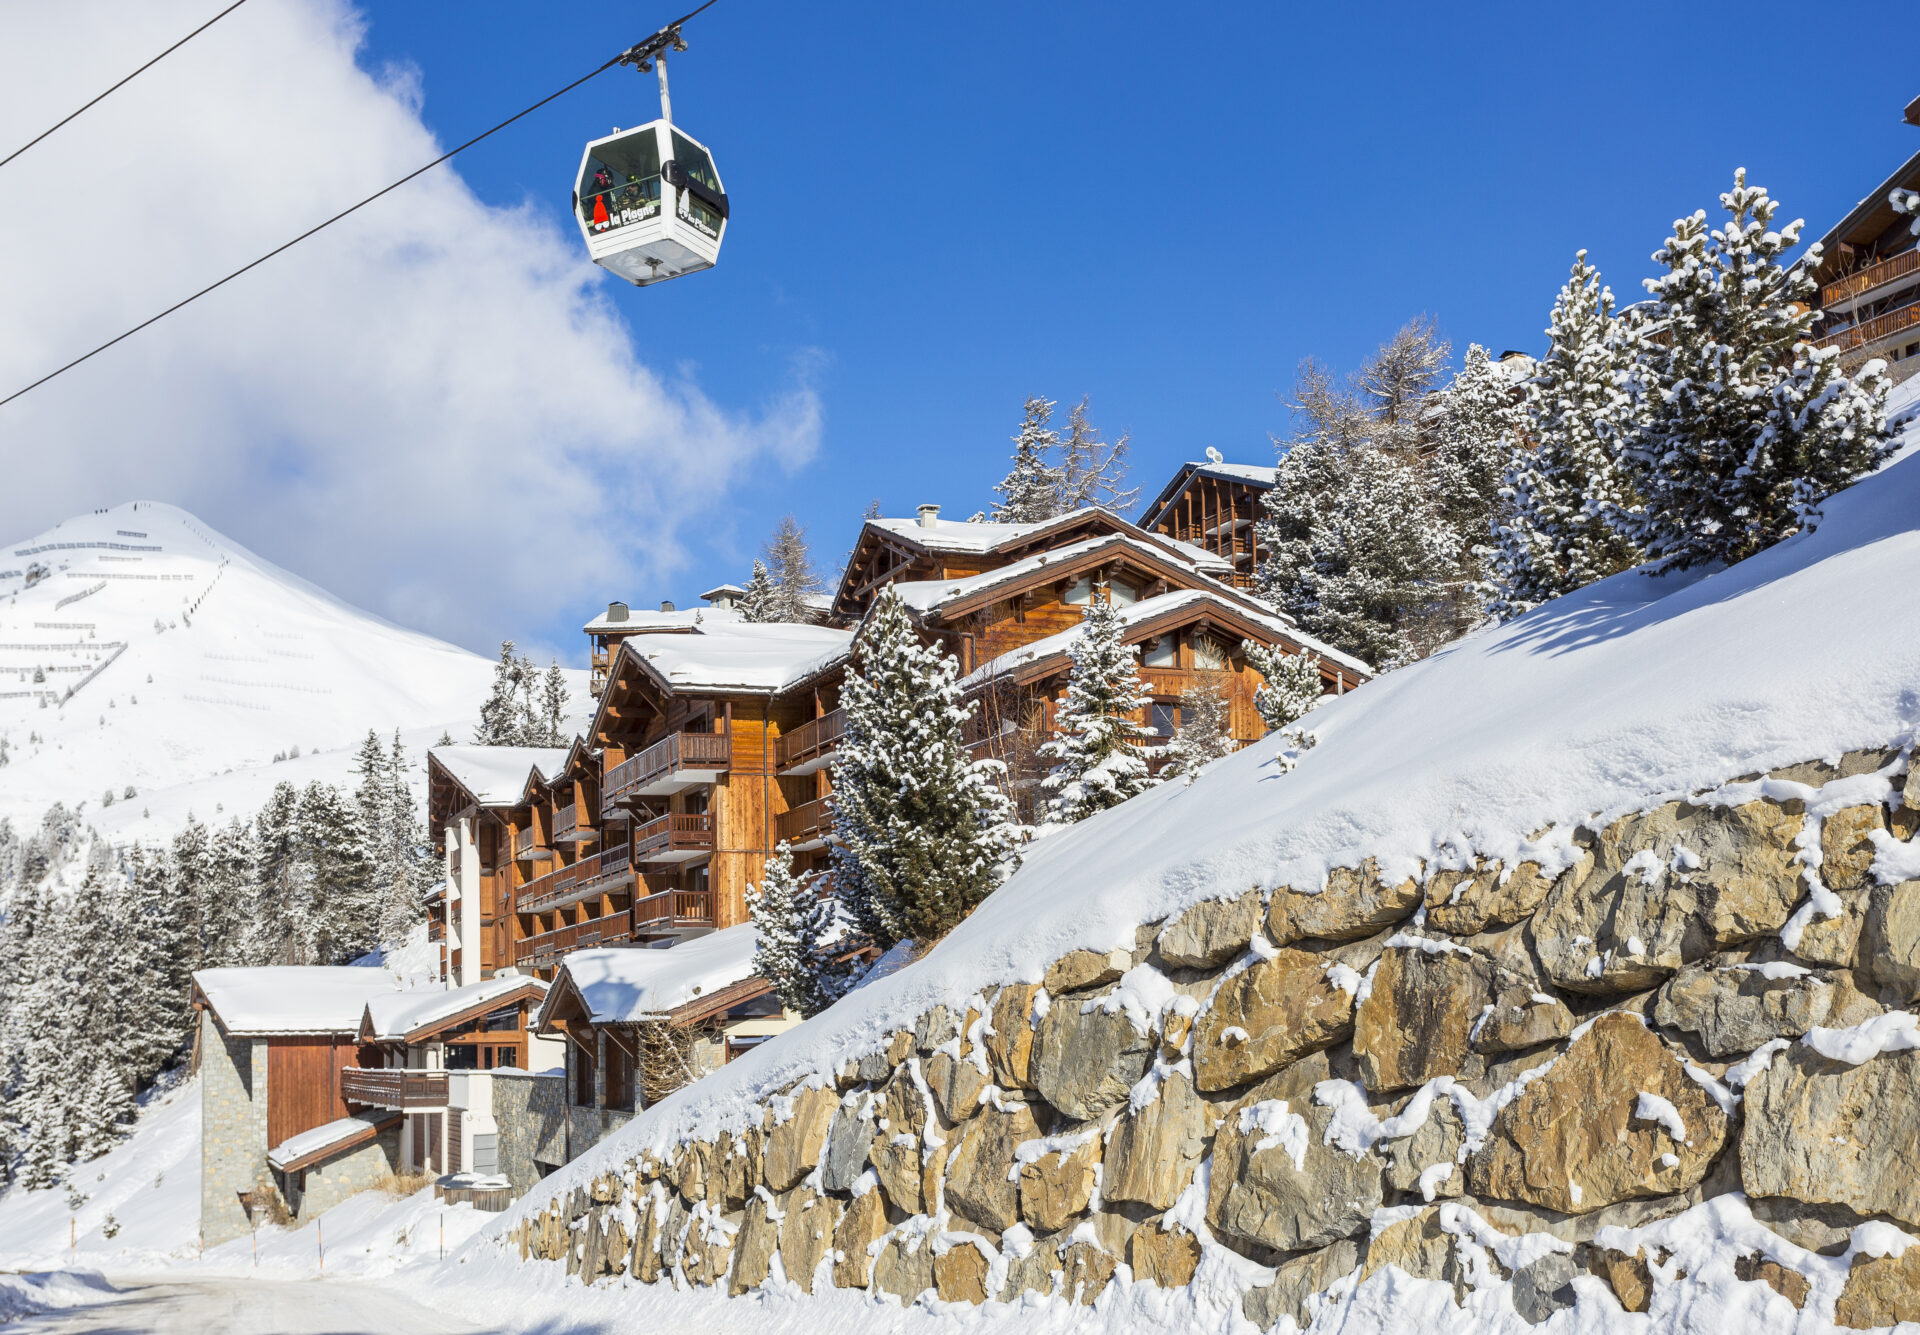 The ski lift going over Hotel Club MMV Les 2 Domaines